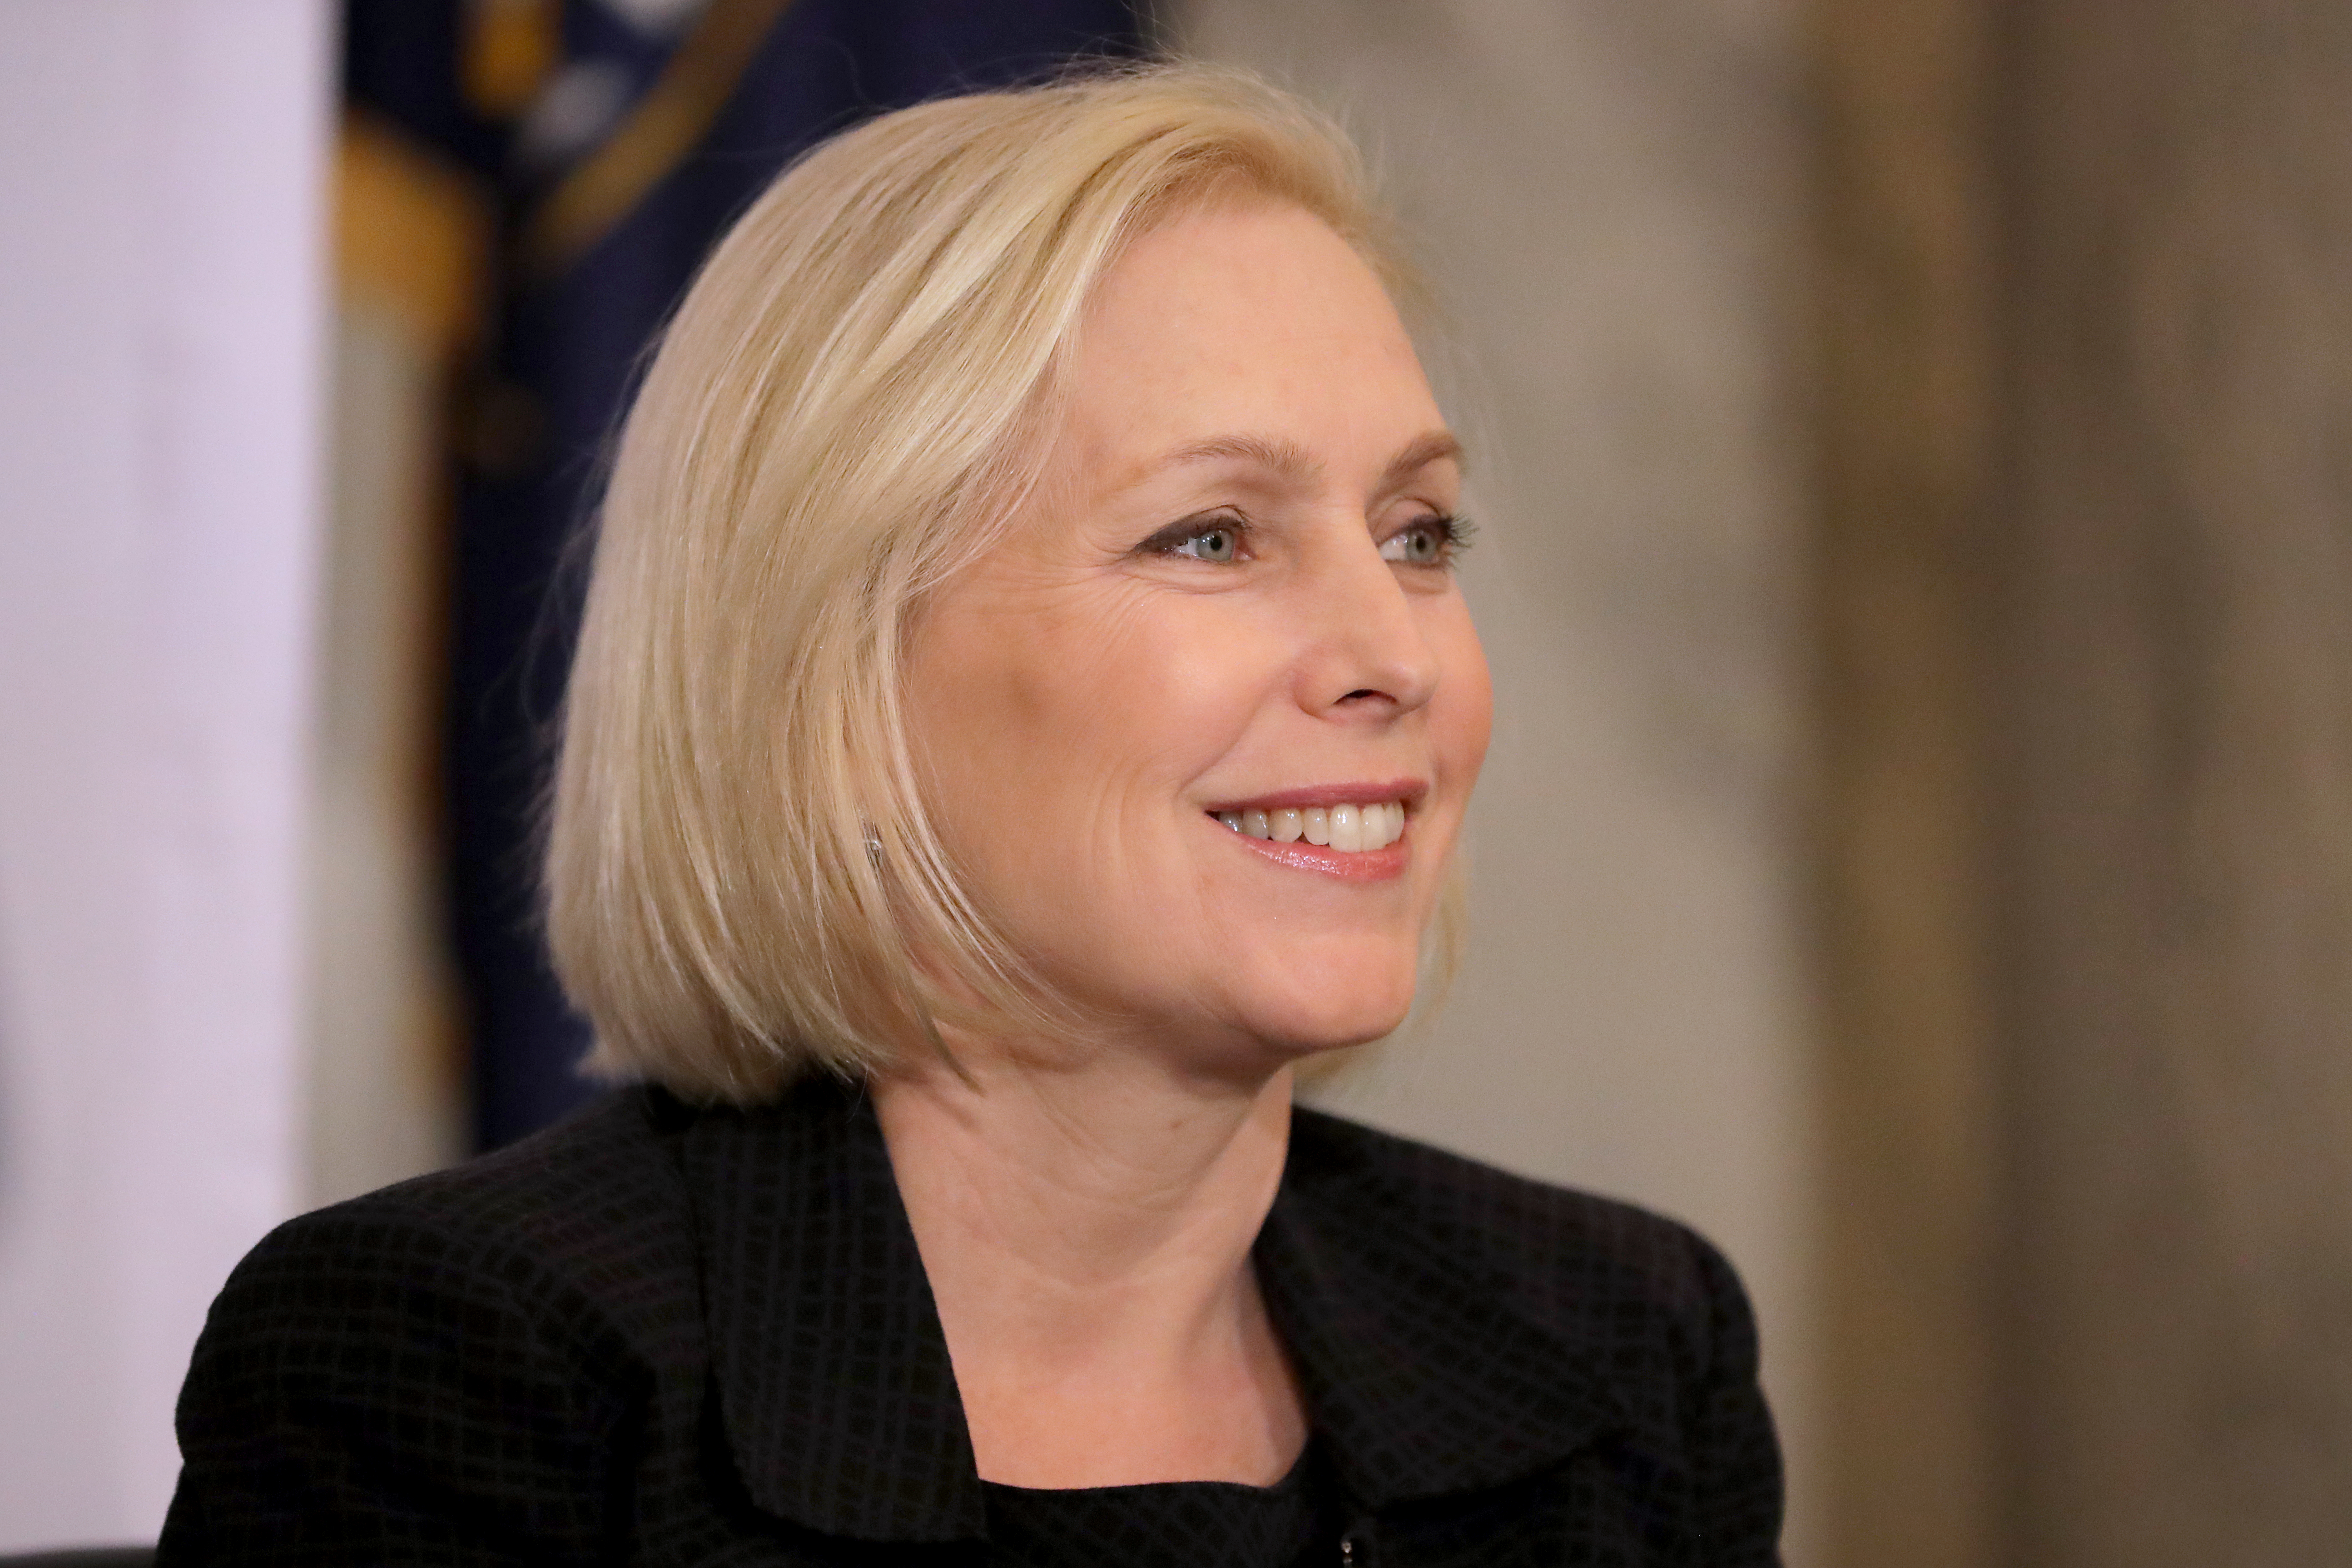 WASHINGTON, DC - NOVEMBER 14: Sen. Kirsten Gillibrand (D-NY) attends a post-midterm election meeting of Rev. Al Sharpton's National Action Network in the Kennedy Caucus Room at the Russell Senate Office Building on Capitol Hill November 14, 2018 in Washington, DC.(Chip Somodevilla/Getty Images)